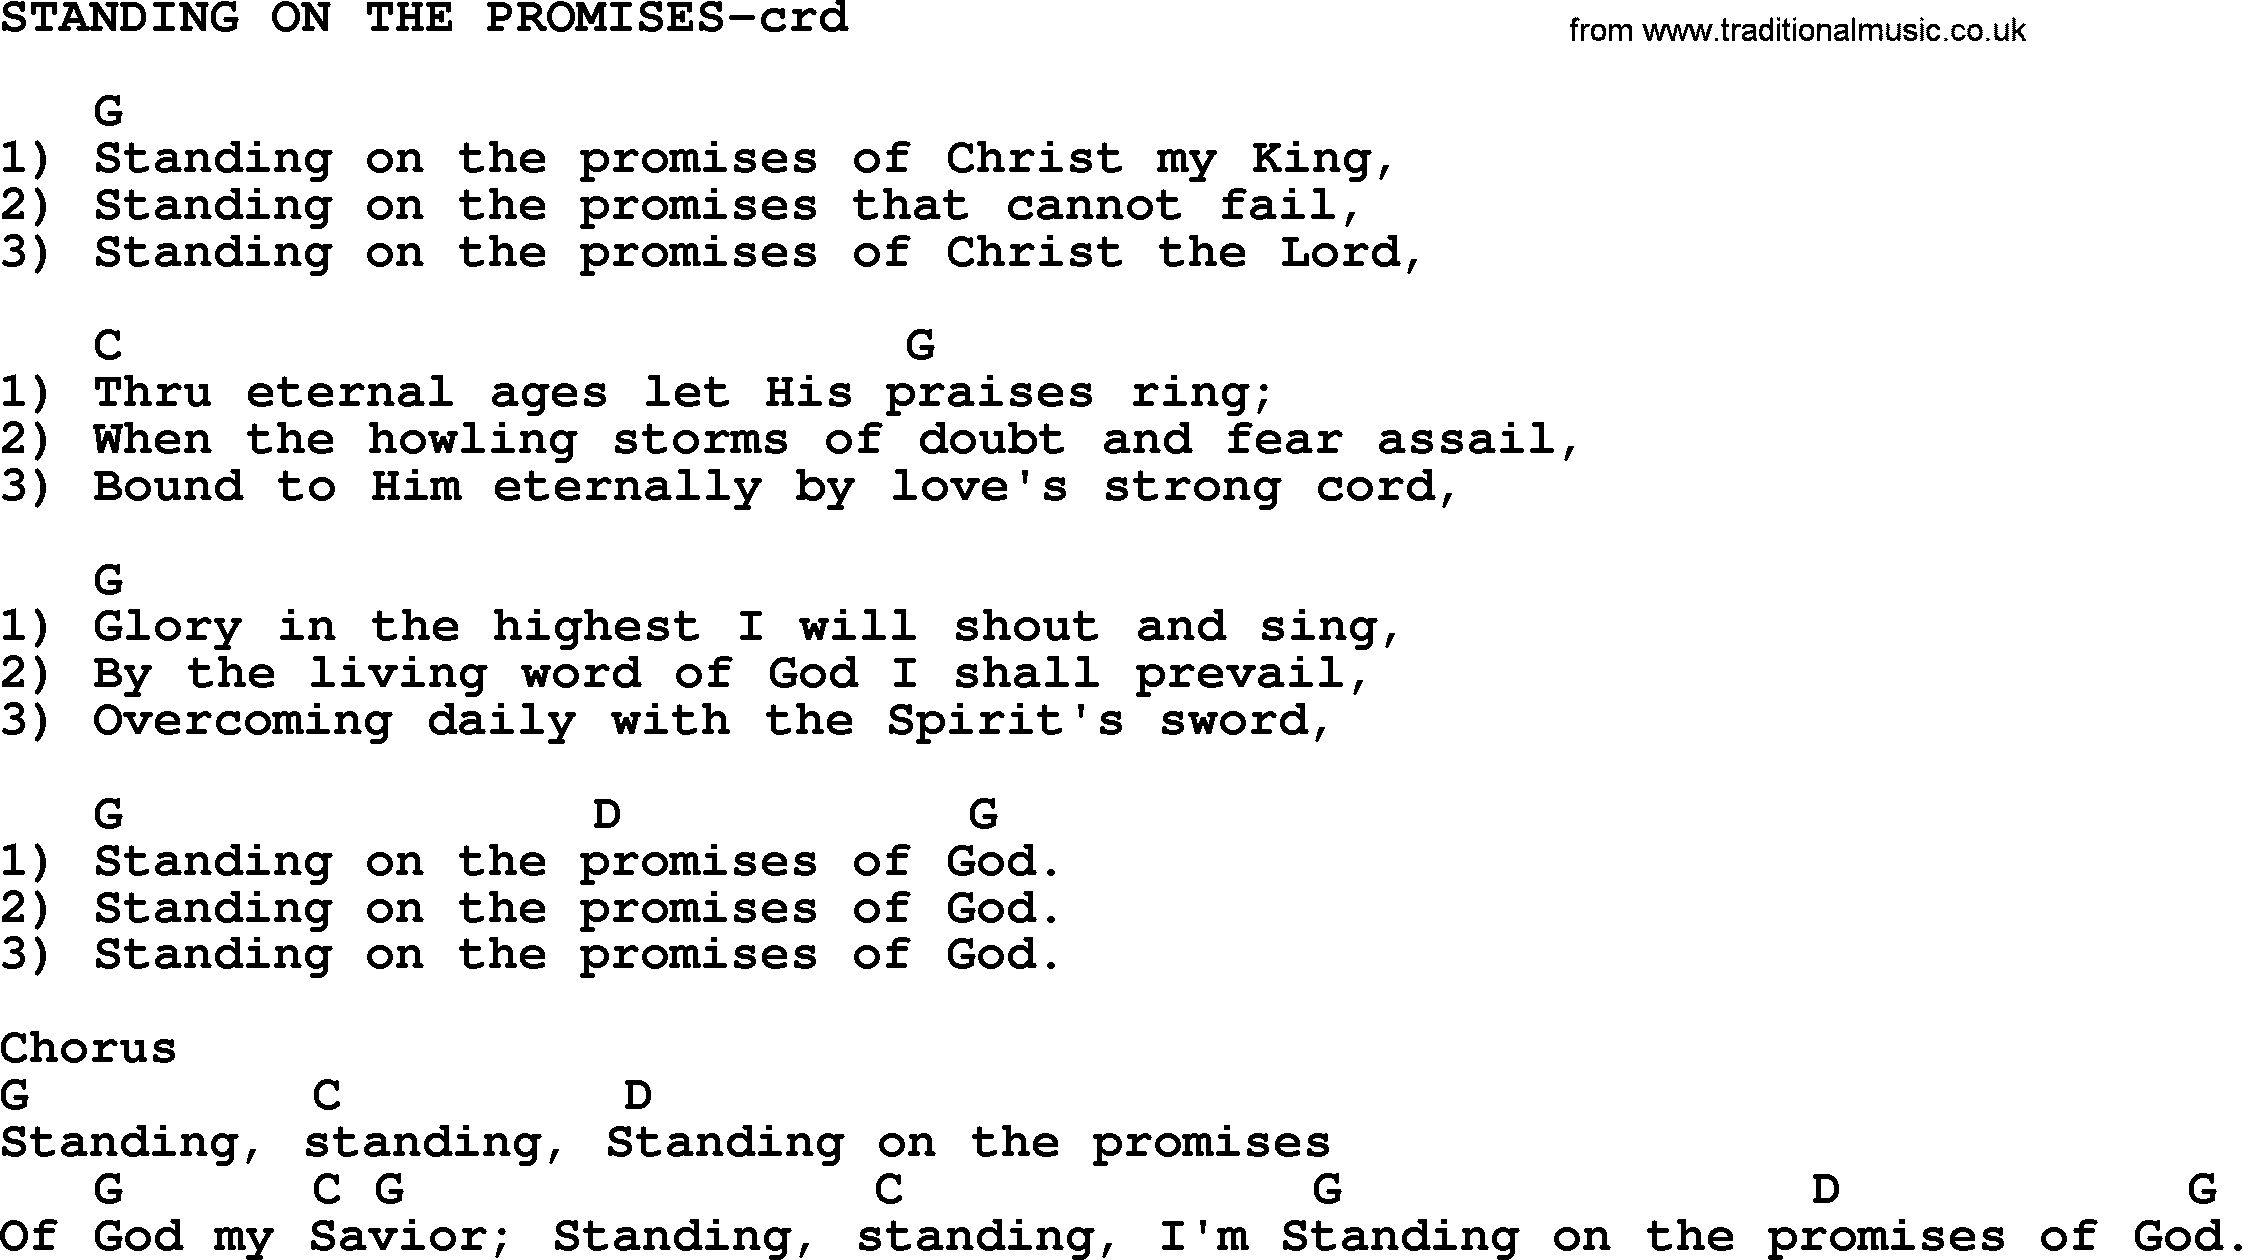 Top 500 Hymn: Standing On The Promises, lyrics and chords